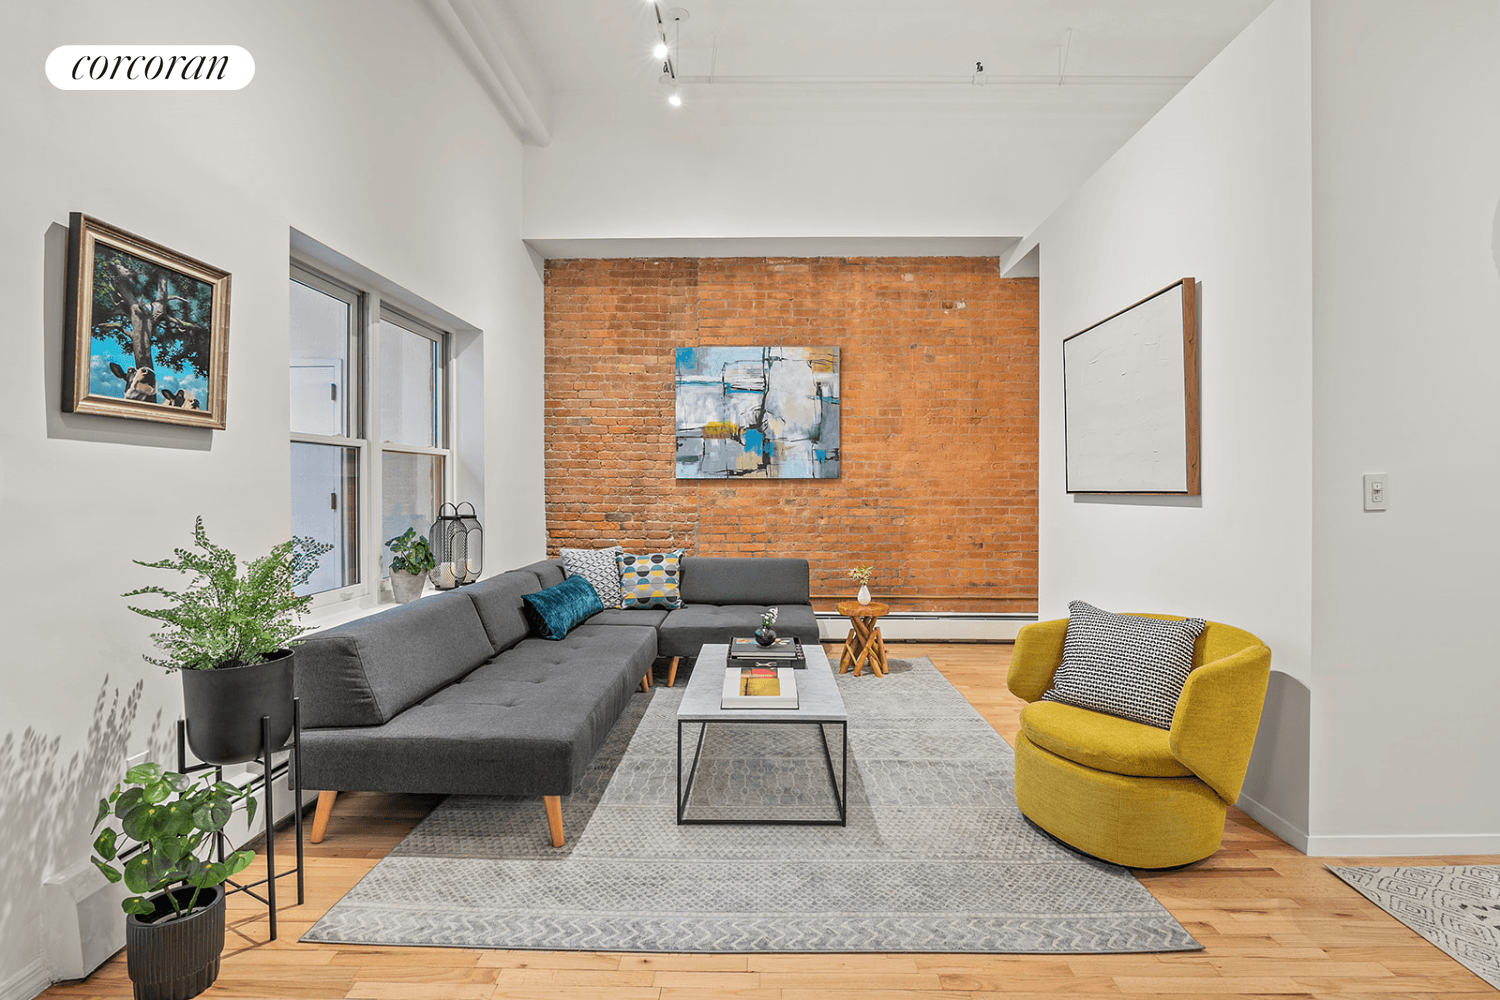 Experience the epitome of loft living at 15 Bergen Street, nestled at the crossroads of Brooklyn's coveted Cobble Hill and Boerum Hill neighborhoods.